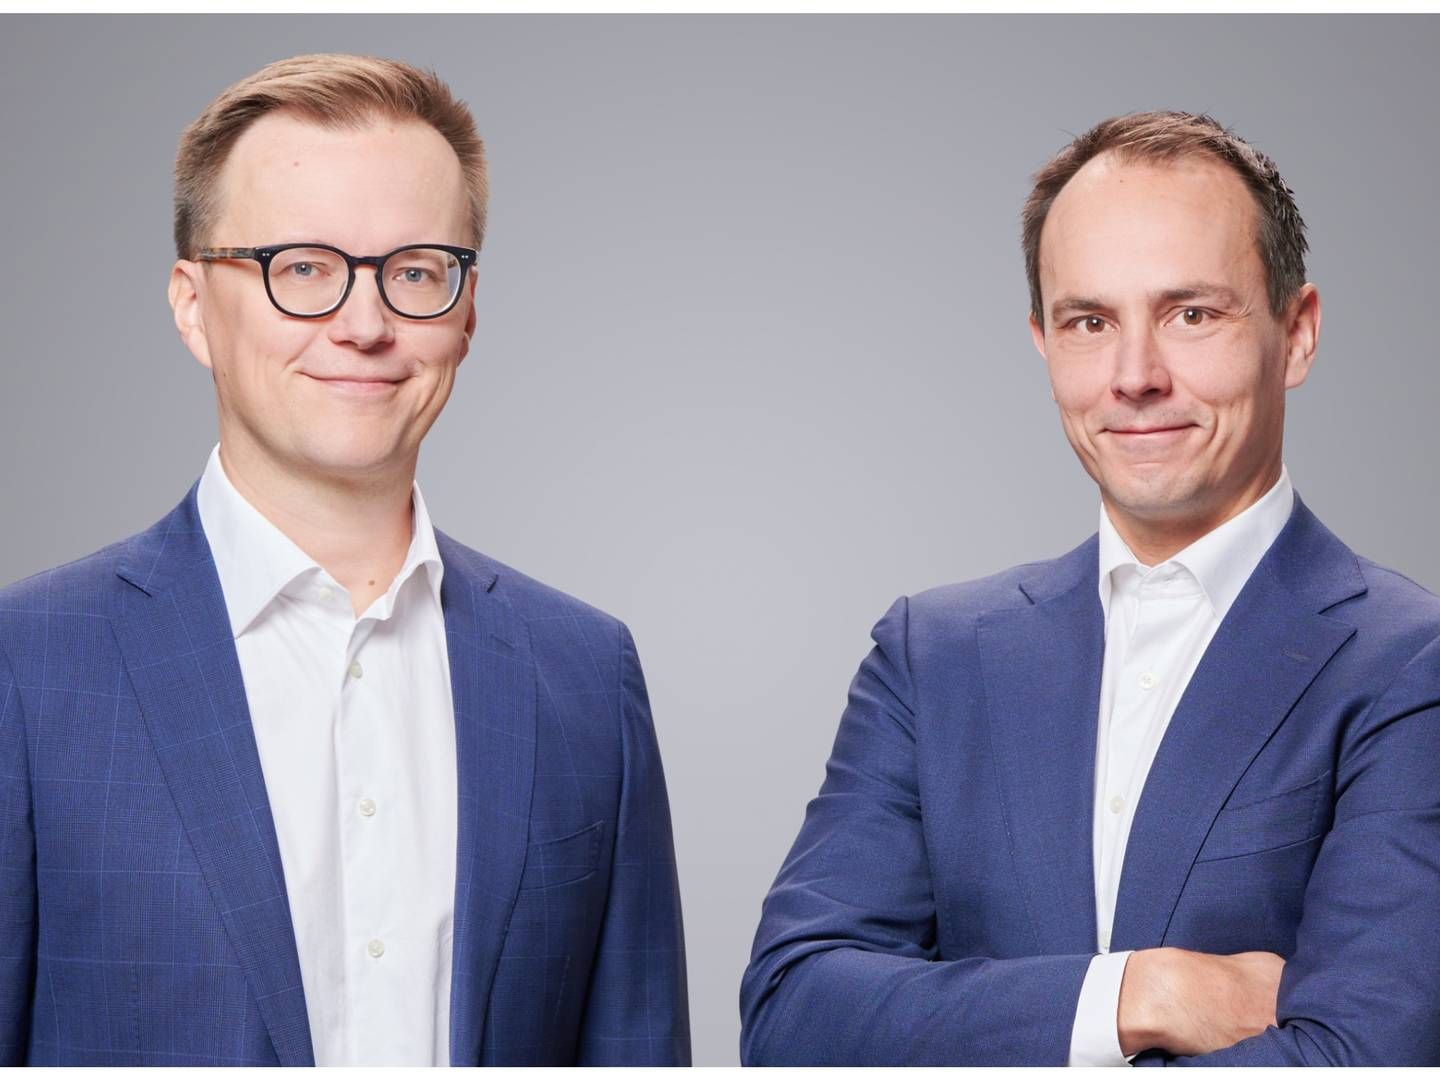 Portfolio managers of Schroders’ two Nordic equity funds Jan Brännback (l.) and Janne Lähdesmäki (r.). | Photo: PR Schroders.